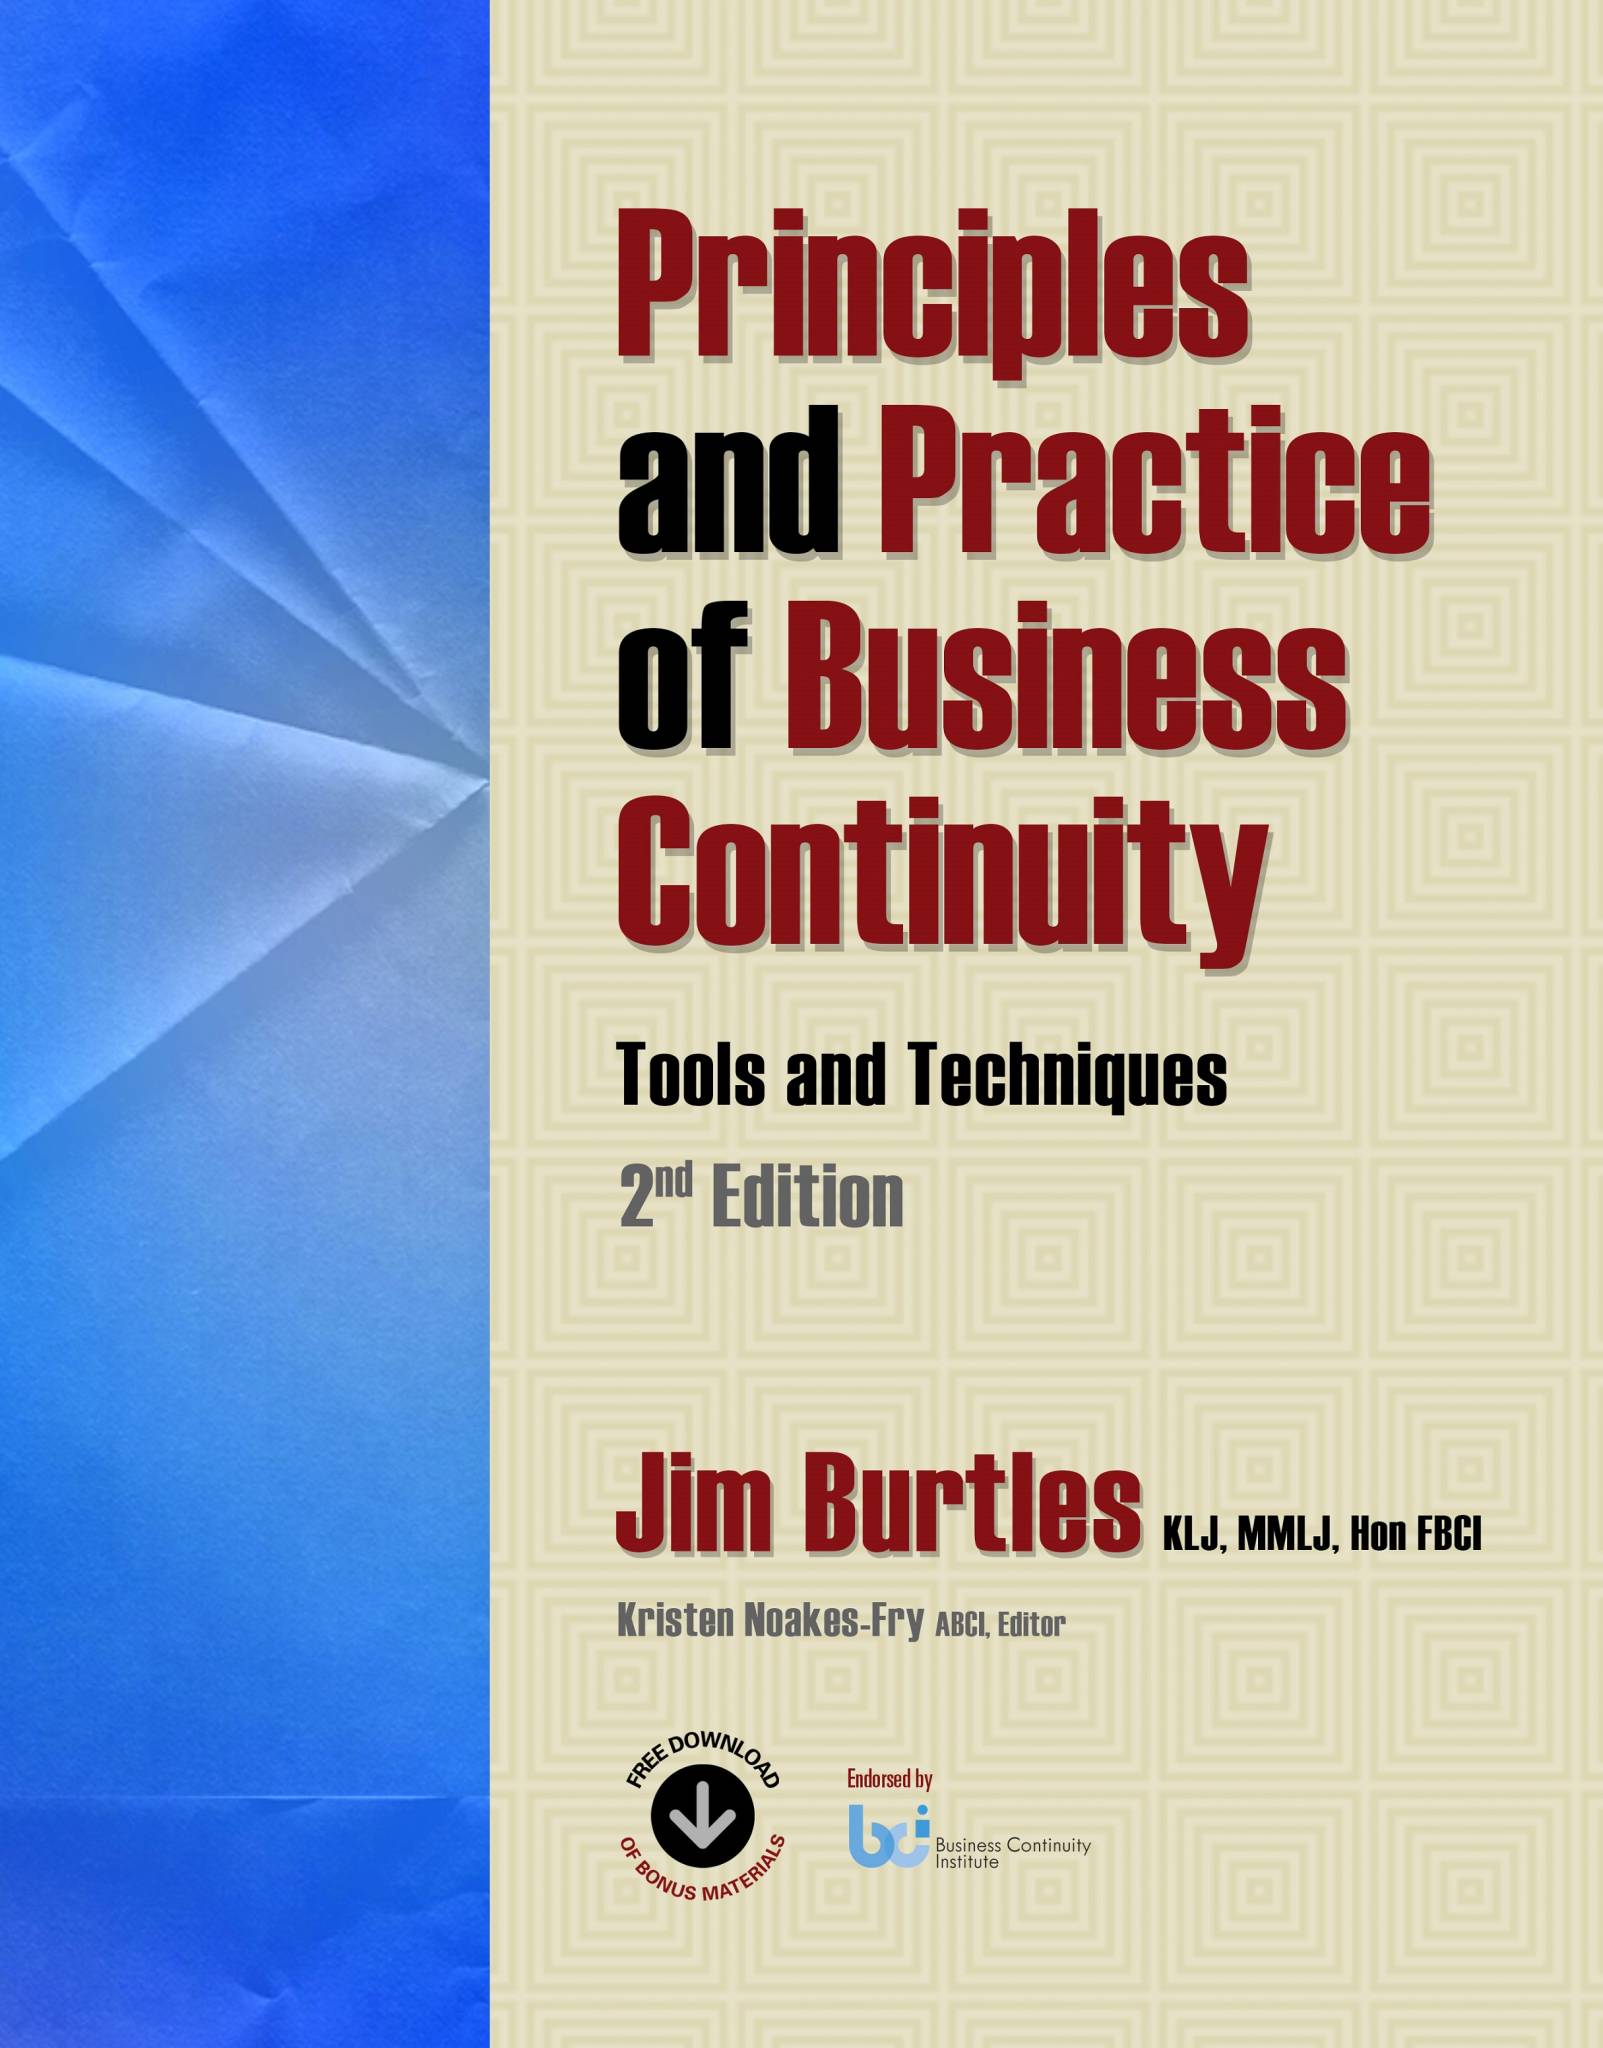 principles-practice-business-continuity-textbook-rothstein-publishing